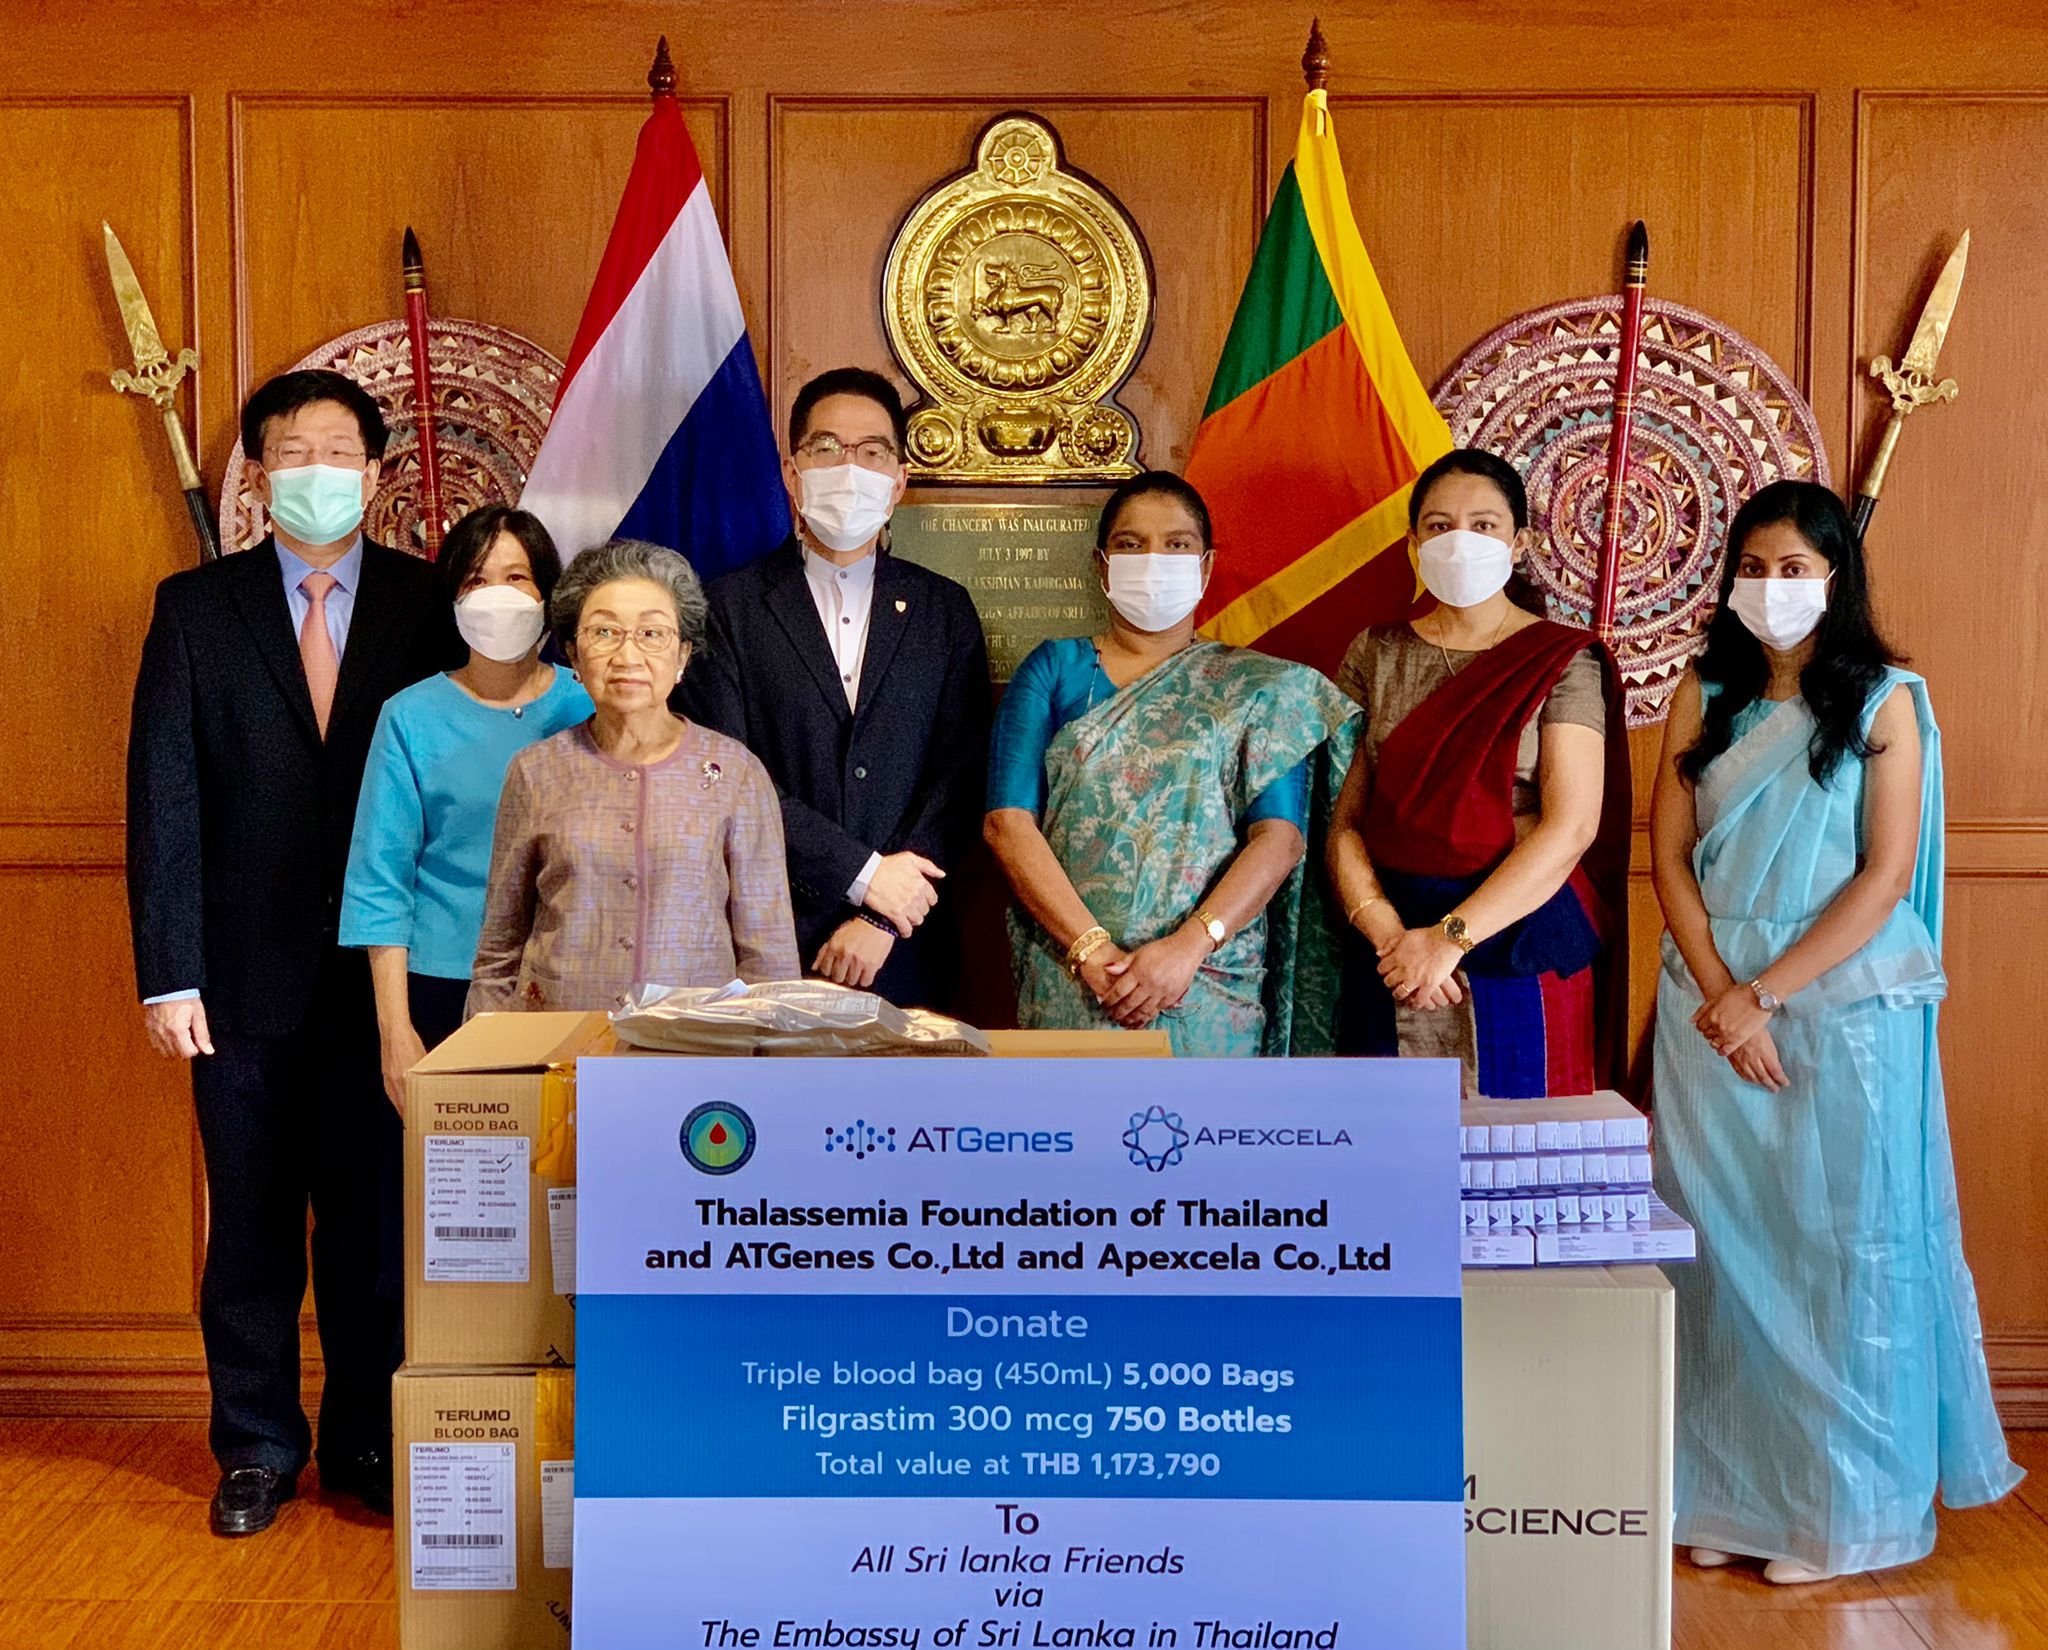 Thalassemia Foundation and Siam Bioscience Group of Thailand donates<br />
Triple 5000 blood bags and Filgrastim 750 Bottles to Sri Lanka.